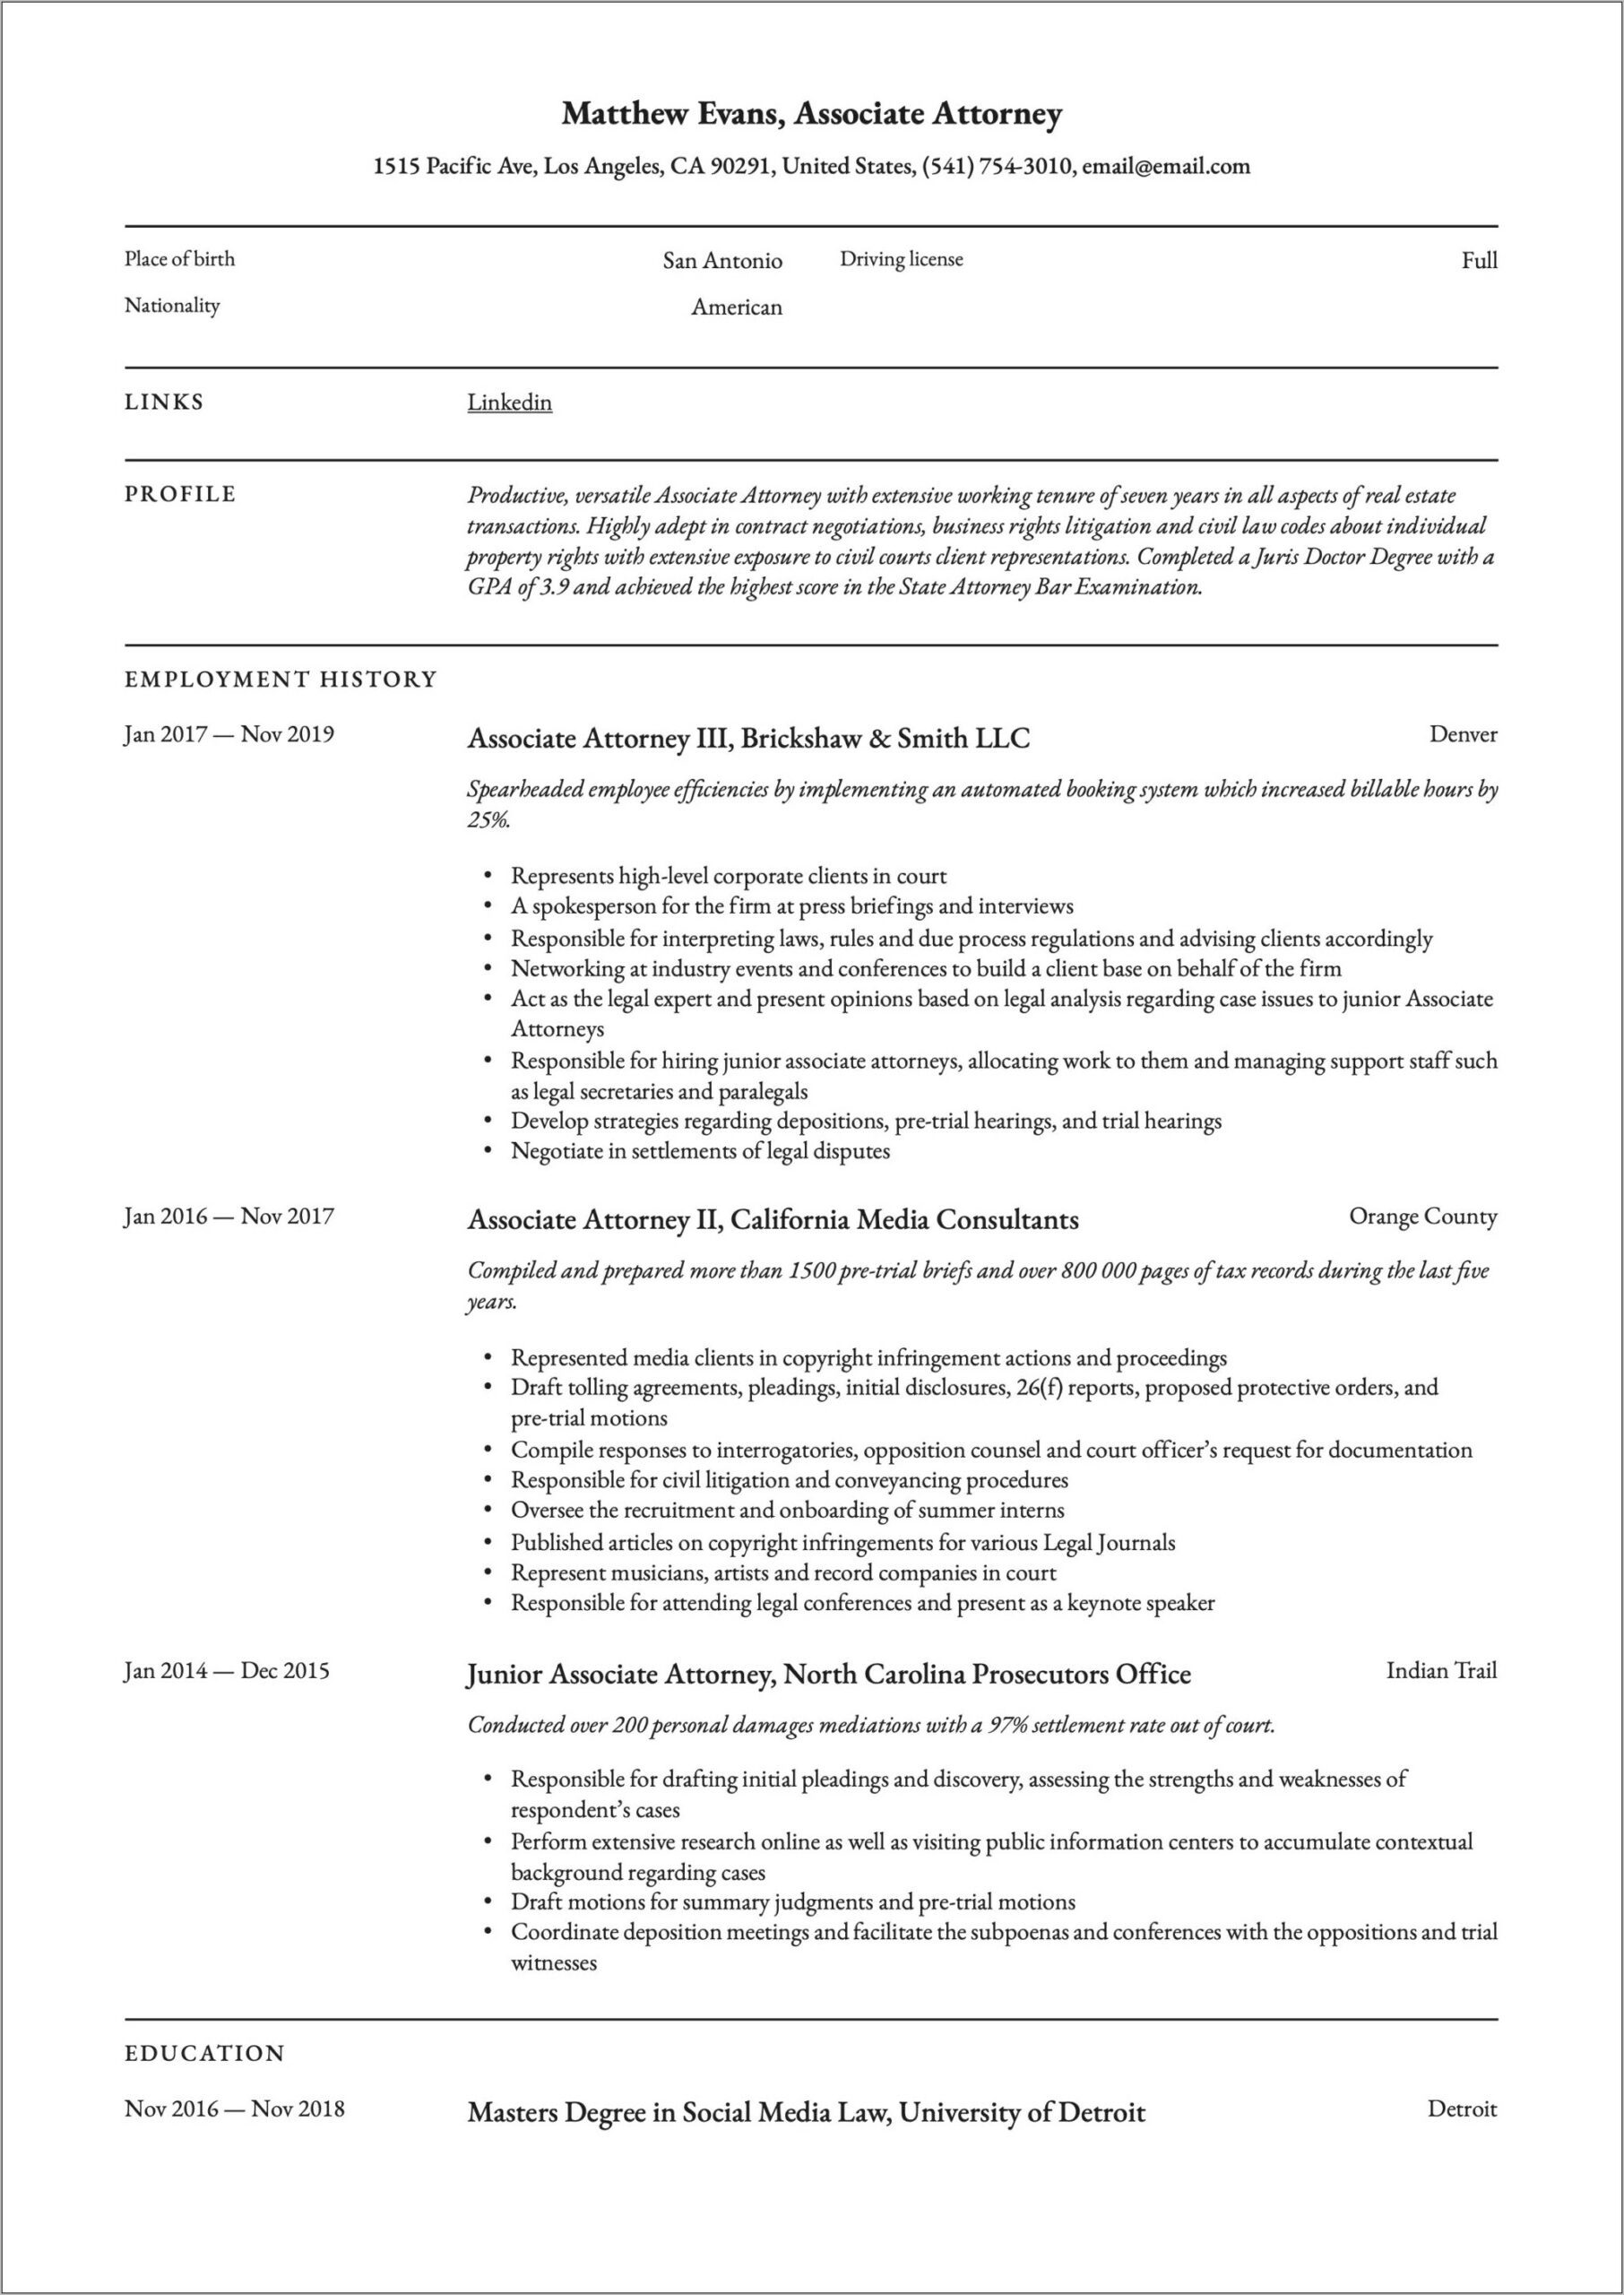 Examples Of Education Section In Lawyer Resume